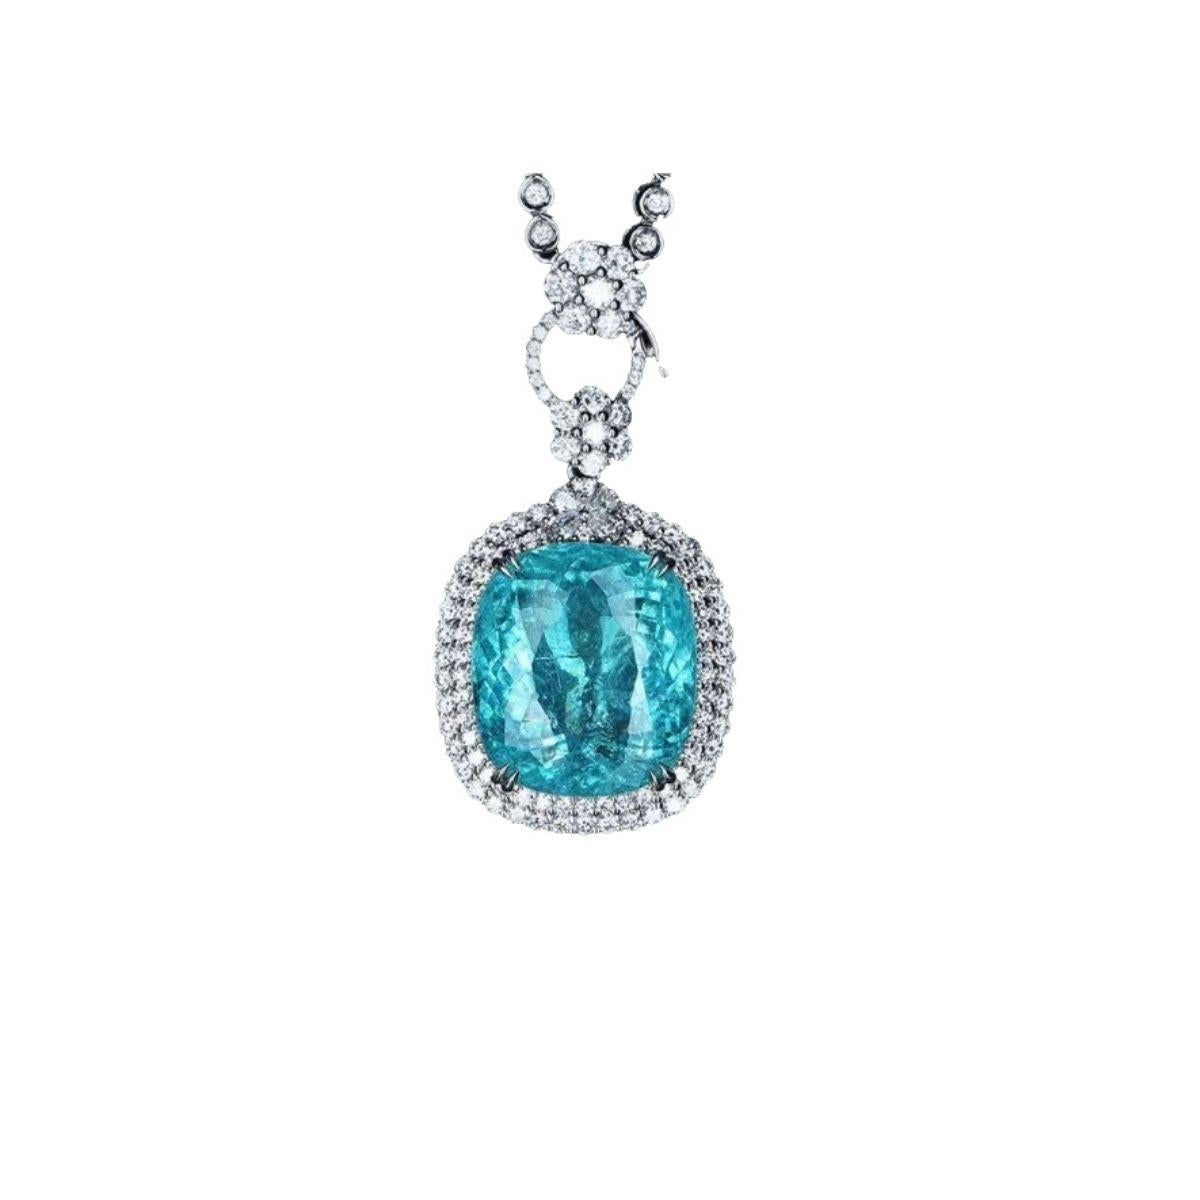 This is a Extremely rare Neon Blue Paraiba Tourmaline Necklace  20.17 ct  with 90 diamonds set in 18k White Gold


The story of this neon-bright tourmaline’s discovery is as intriguing as the stone itself. Hidden for many years beneath hills in the